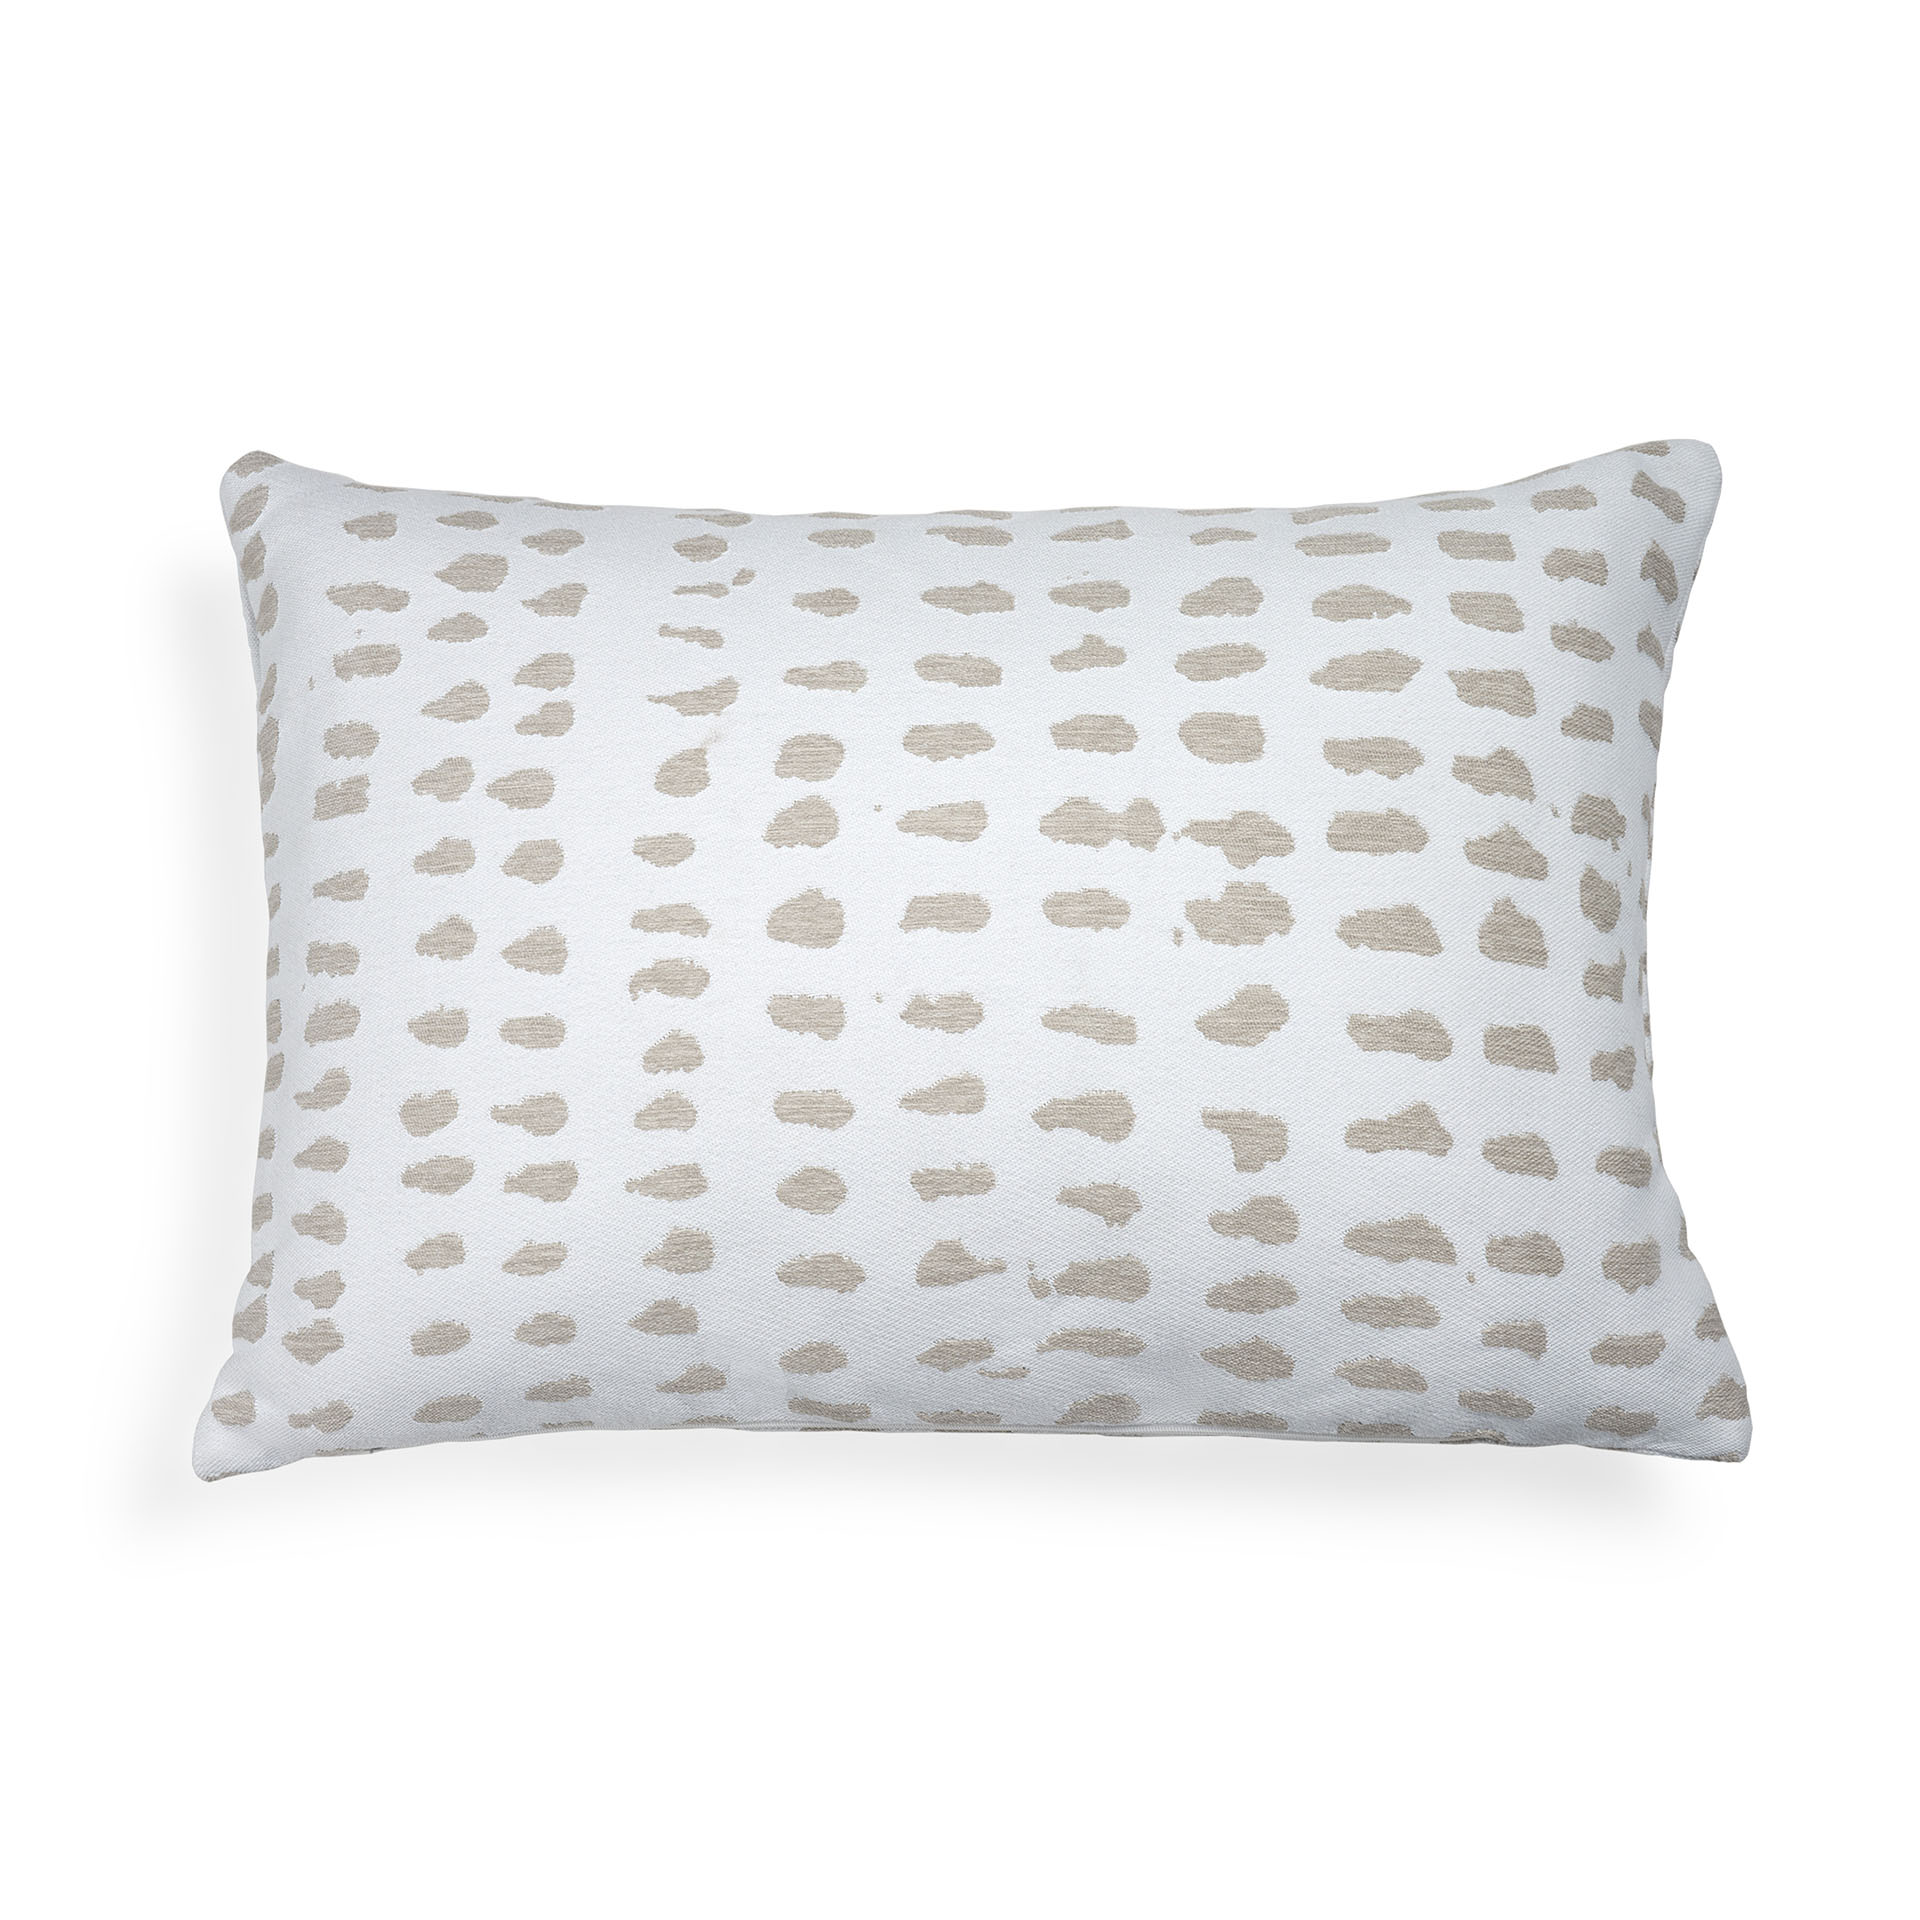 White Dots outdoor cushion